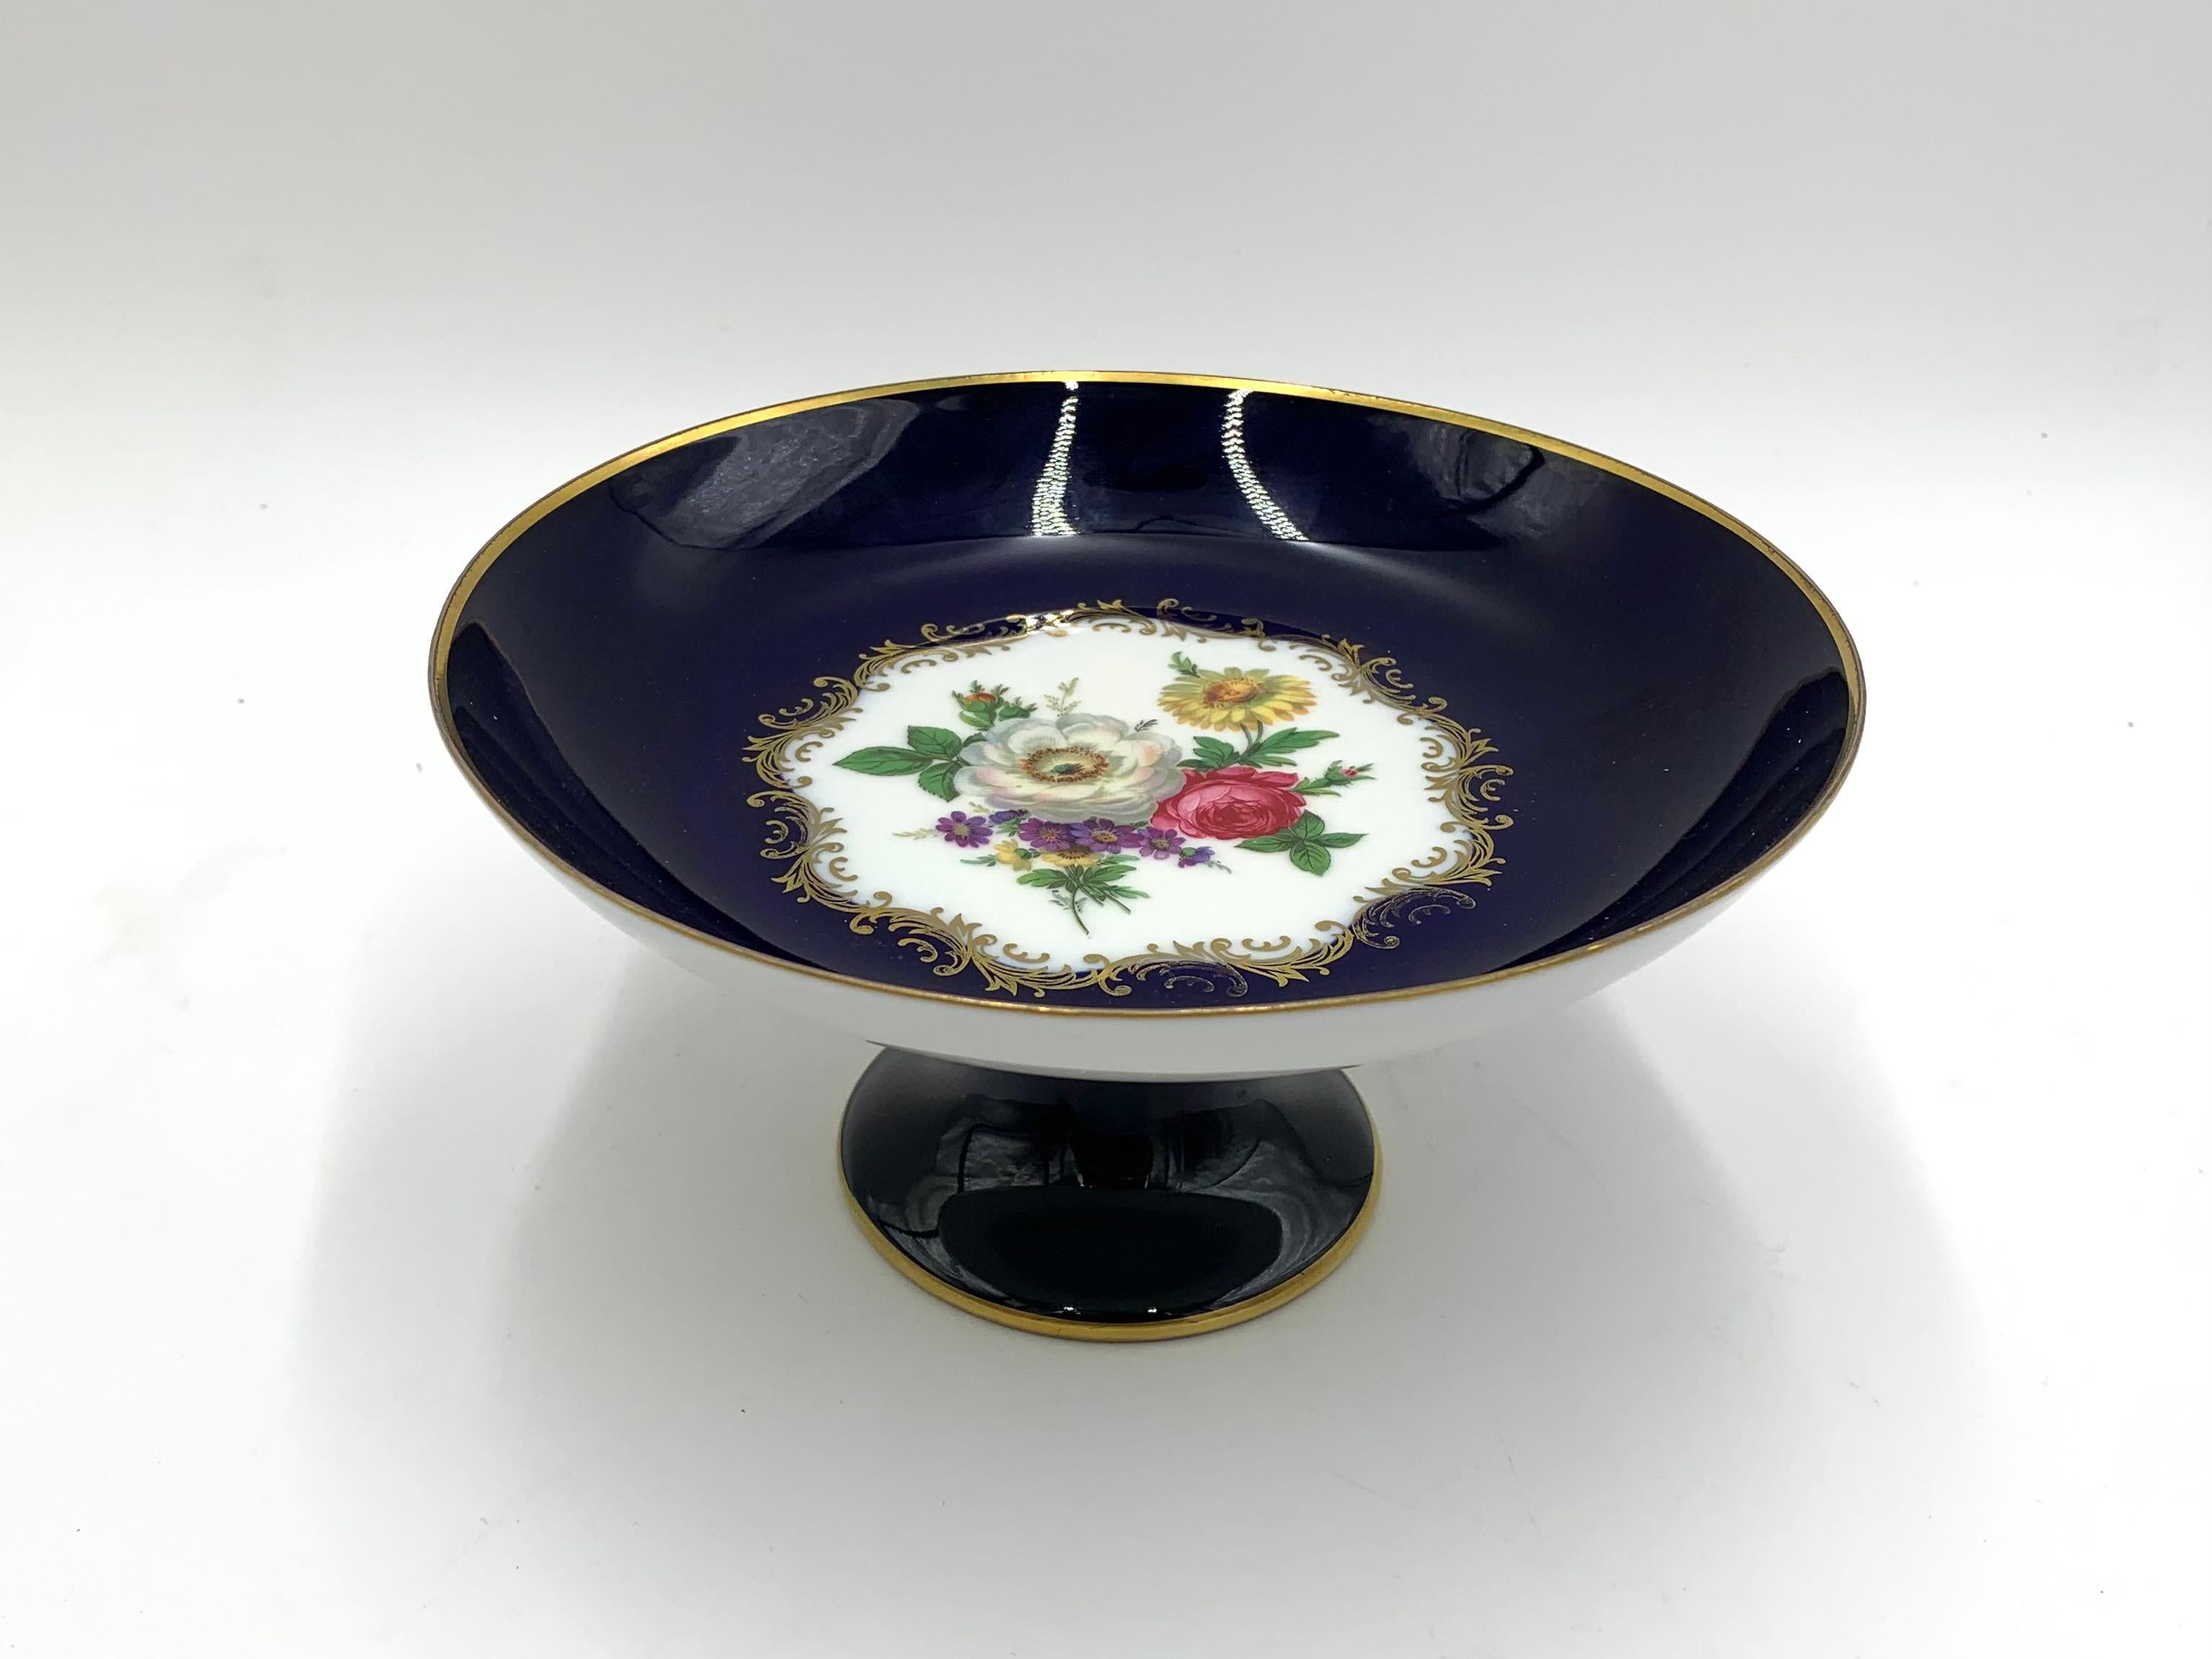 A small porcelain platter on a foot, decorated in the Echt Kobalt technique.

Signed Bavaria Schumann Arzberg. Produced in Germany in the years 1960-1970.

Very good condition, no damage.

Measure: Height 10.5 cm / diameter 20.5 cm.